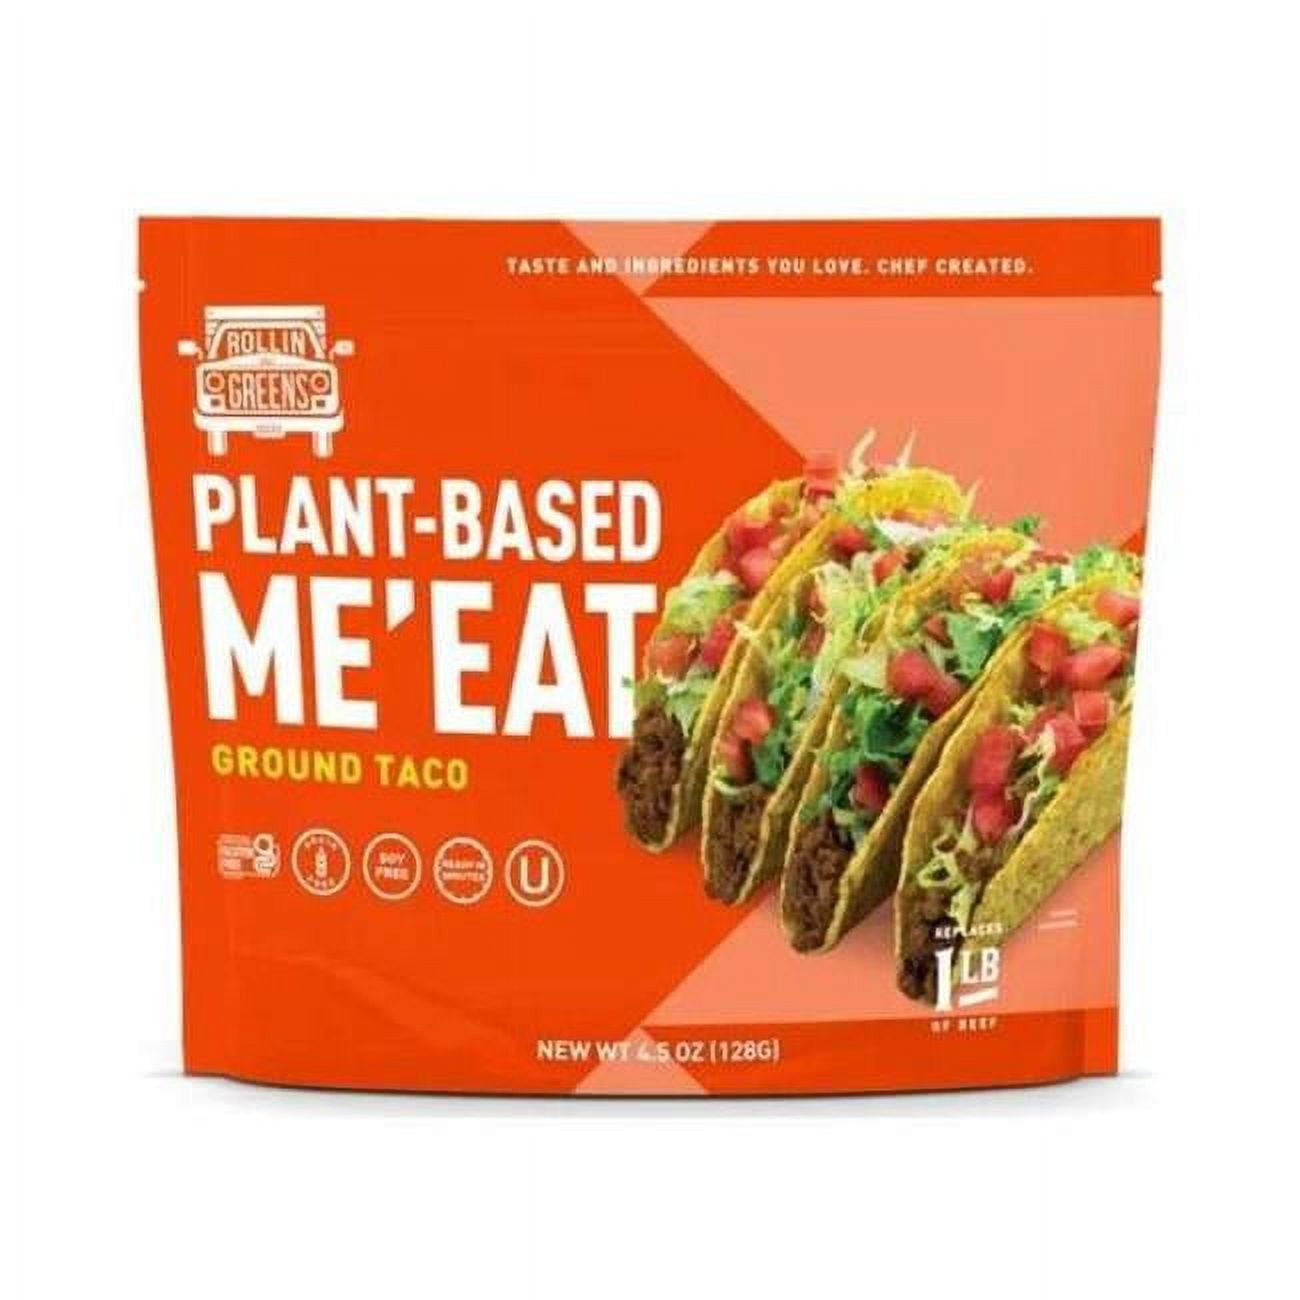 Rollingreens Plant-Based Ground Taco Meat 4.5 Oz Pouch